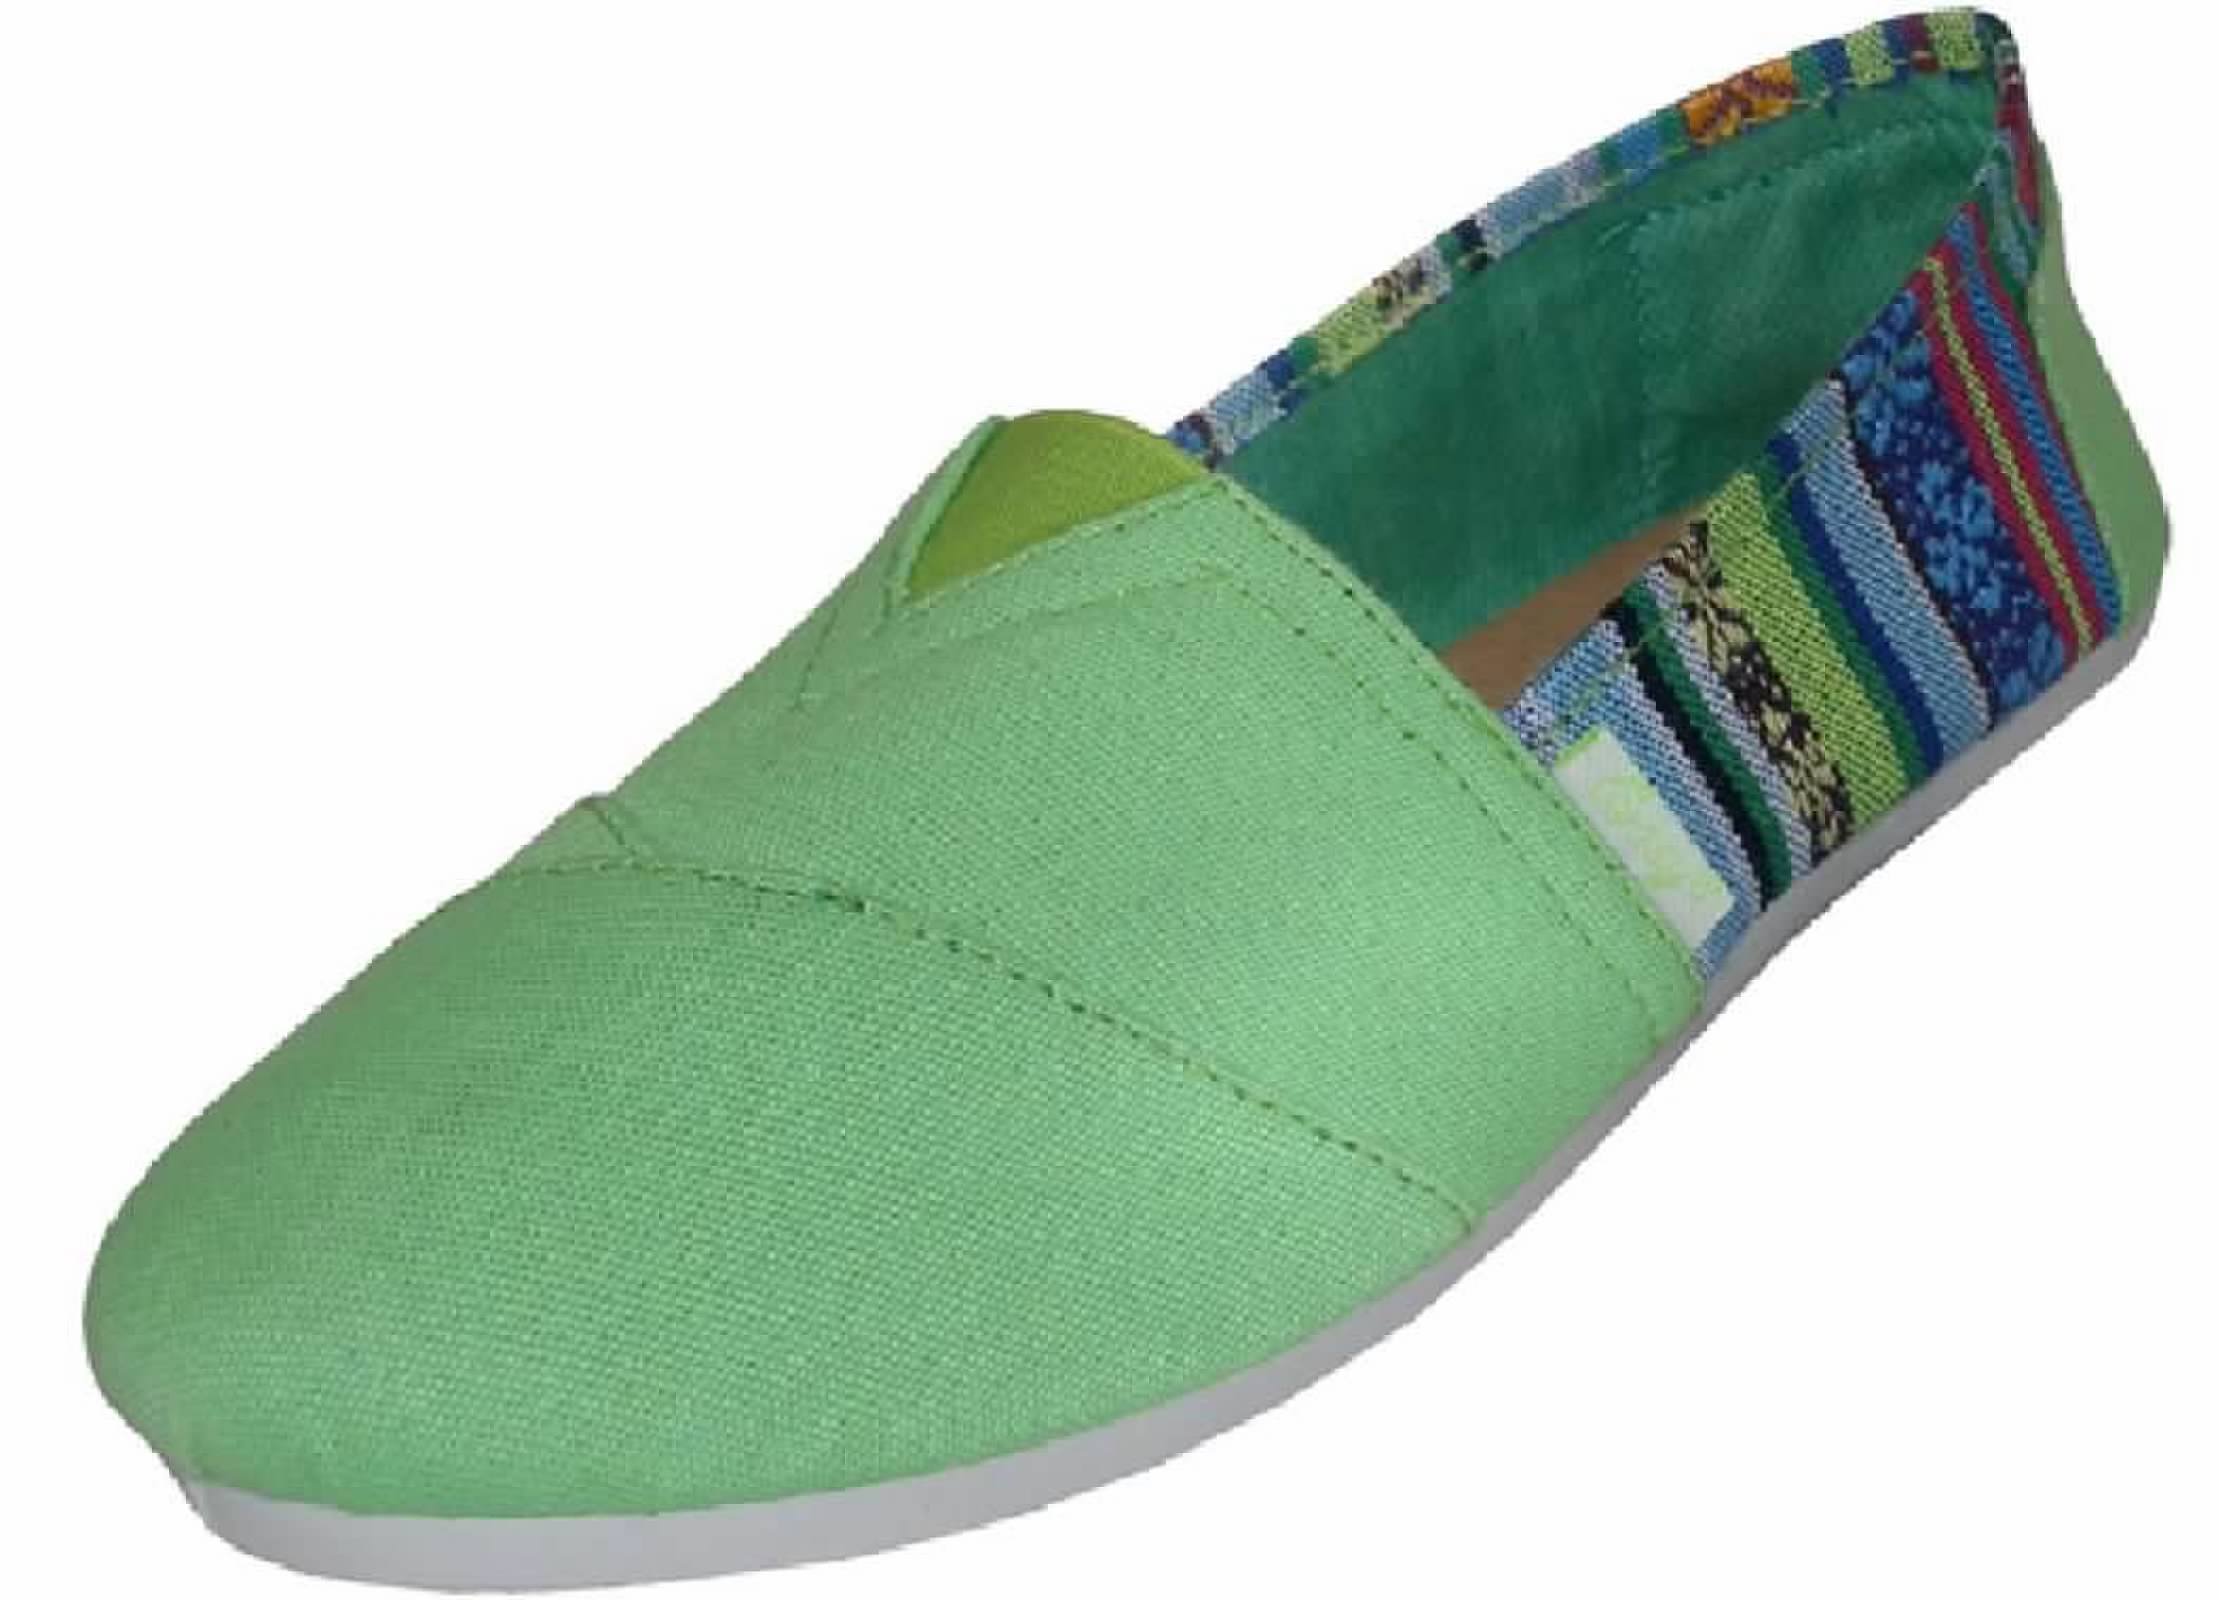 EasySteps Women's Canvas Slip-On Shoes with Padded Insole Green-8 - image 1 of 2